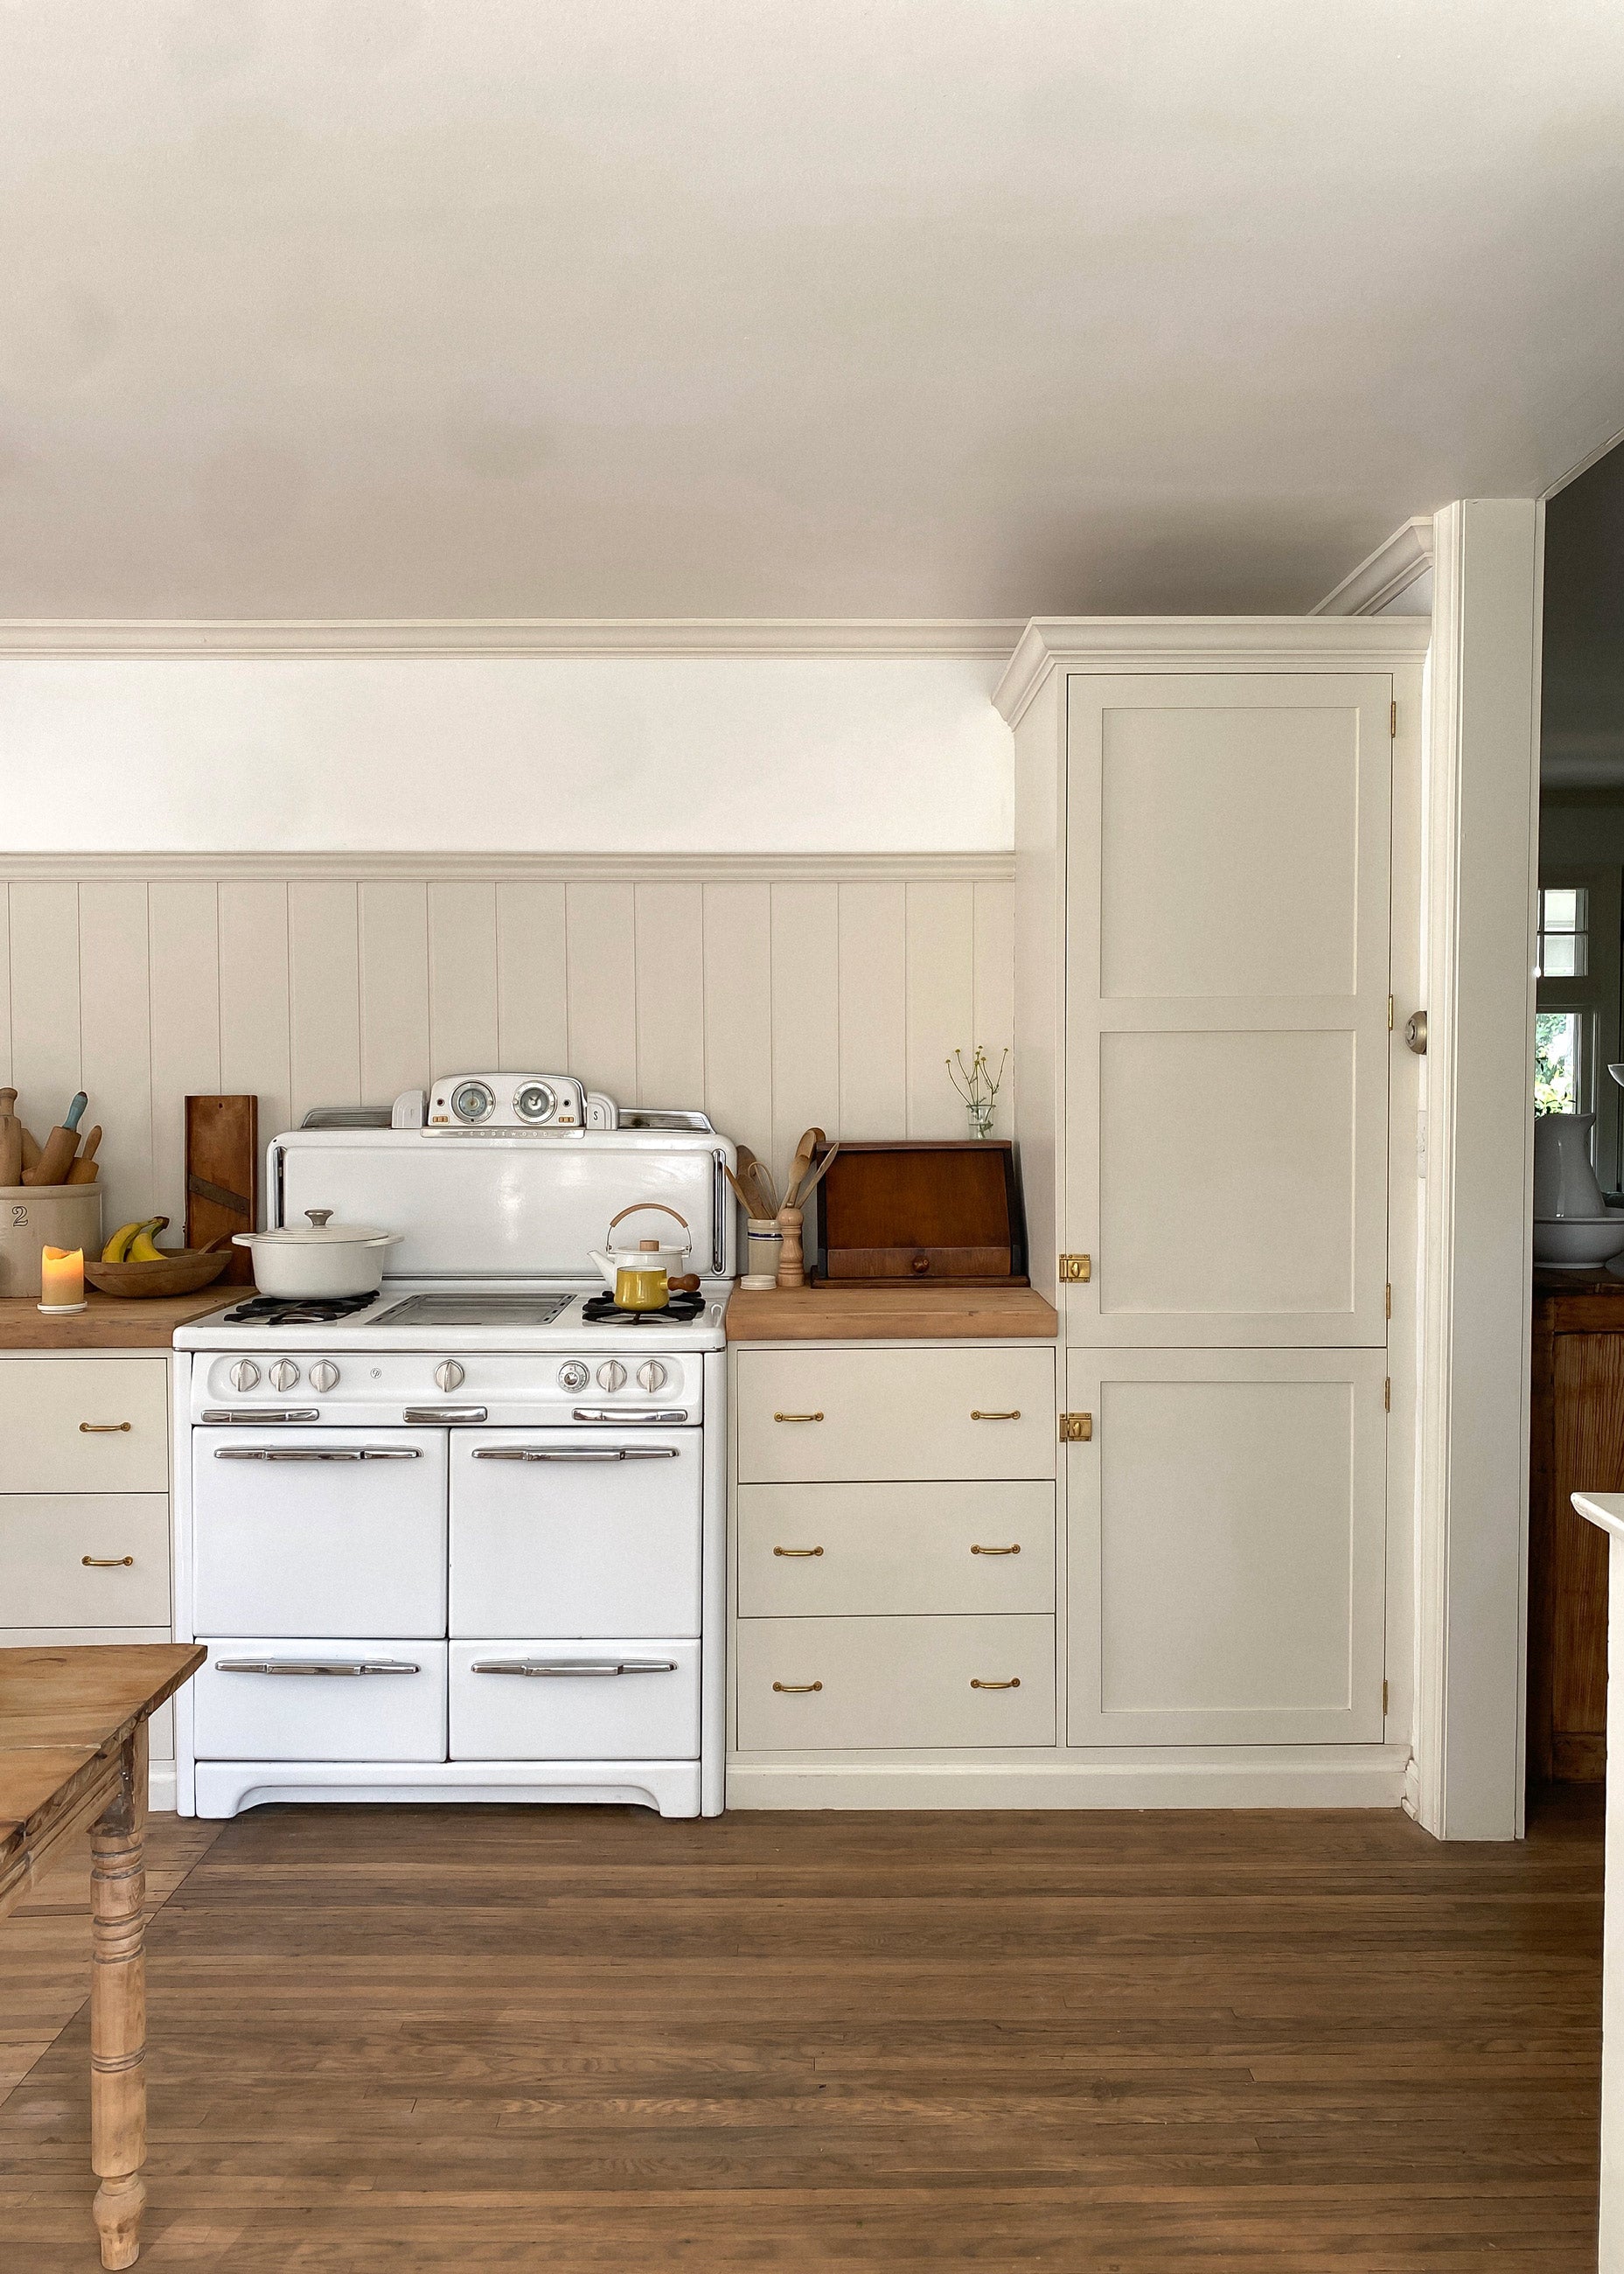 Bright white kitchen in a traditional style home with a vintage stove.